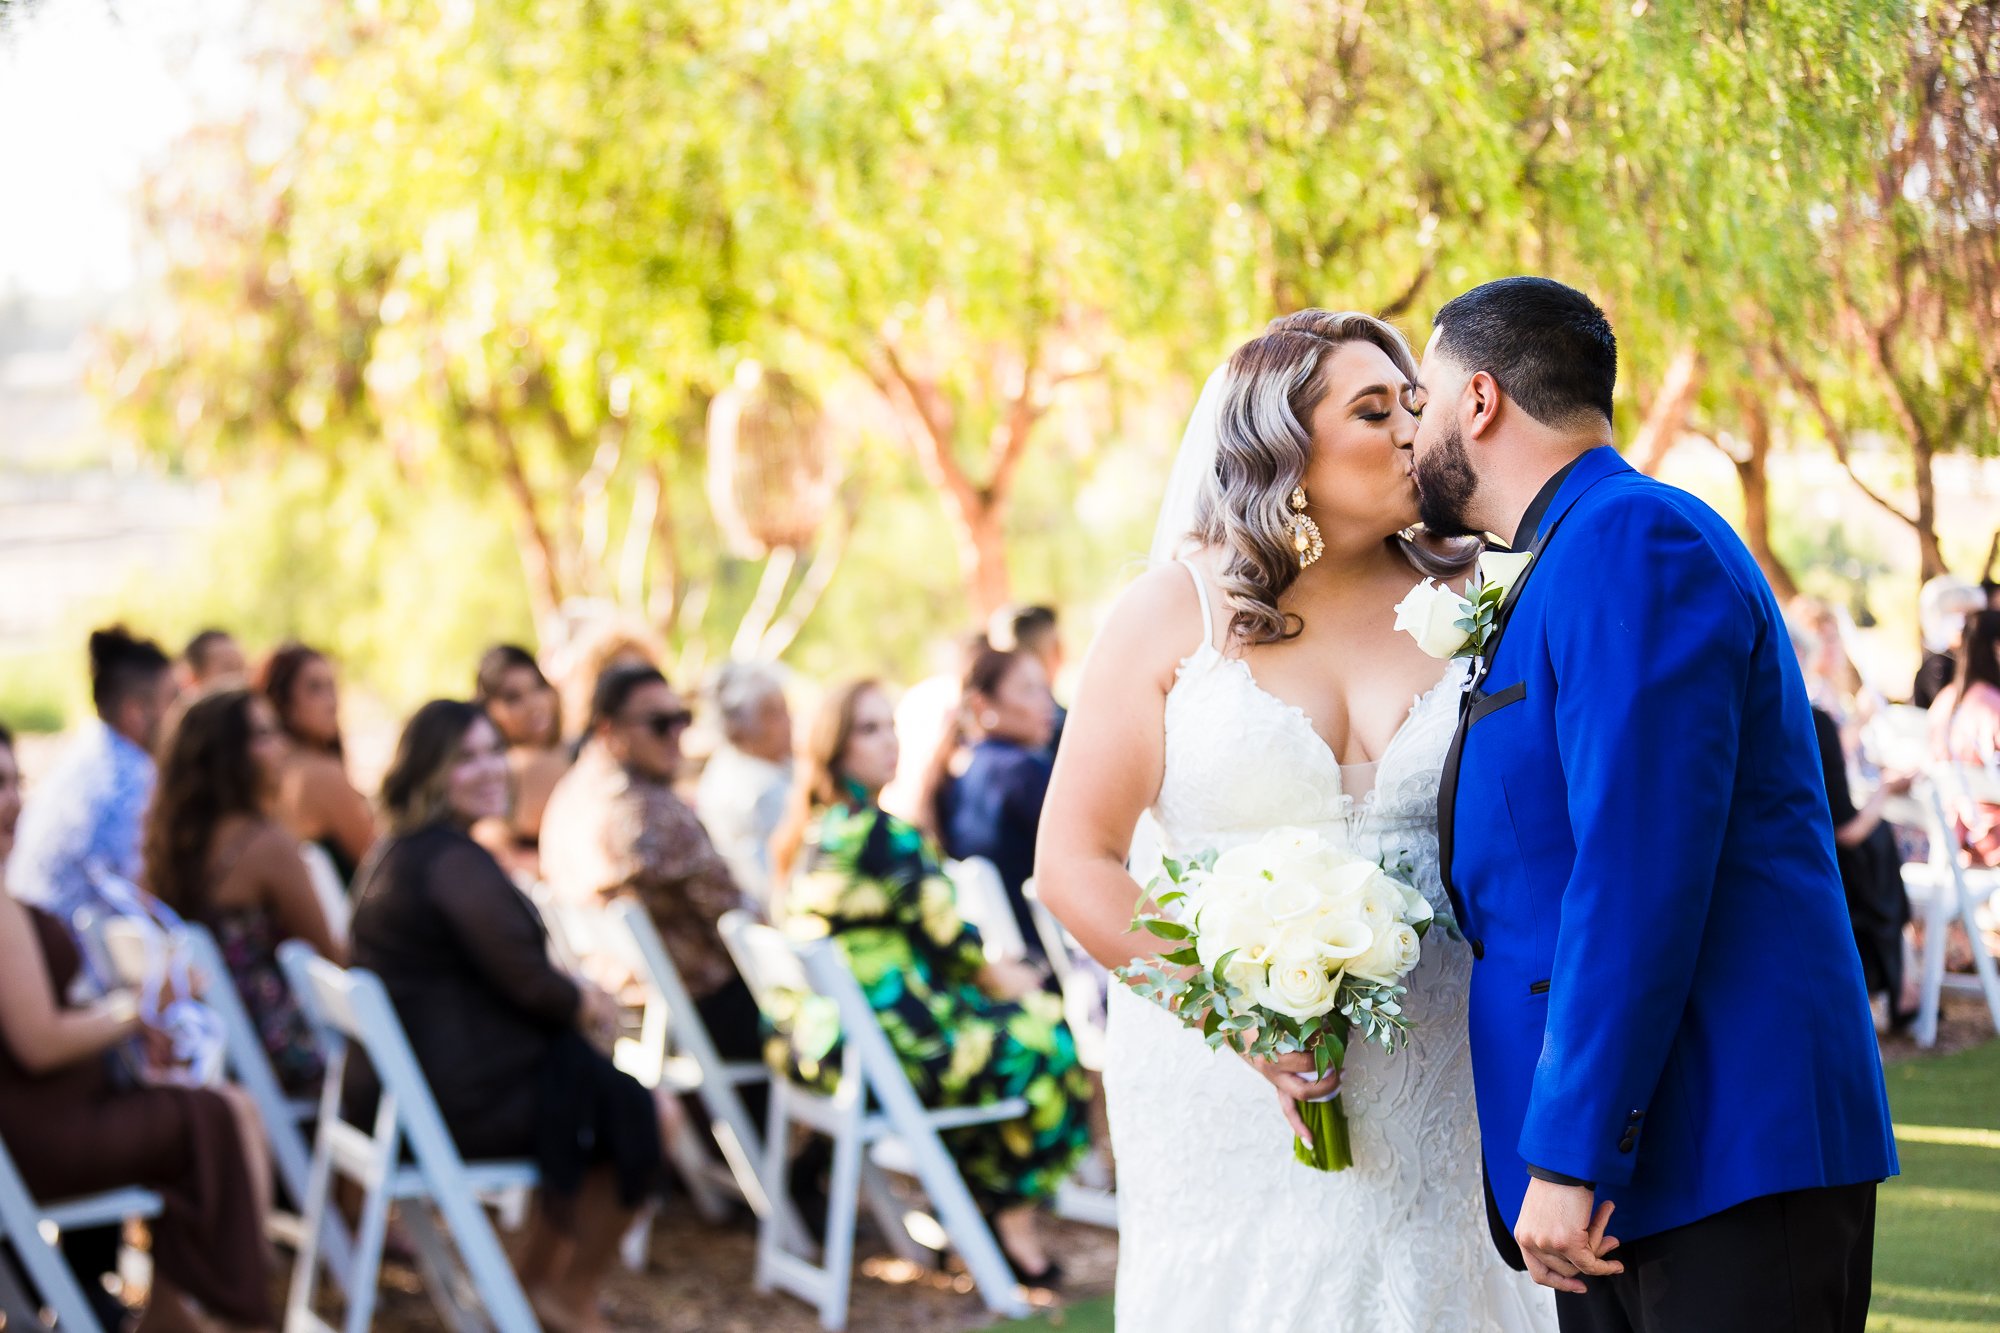 Bride and Groom kiss as they walk down the aisle together after their wedding ceremony at La Hacienda Outdoor Venue